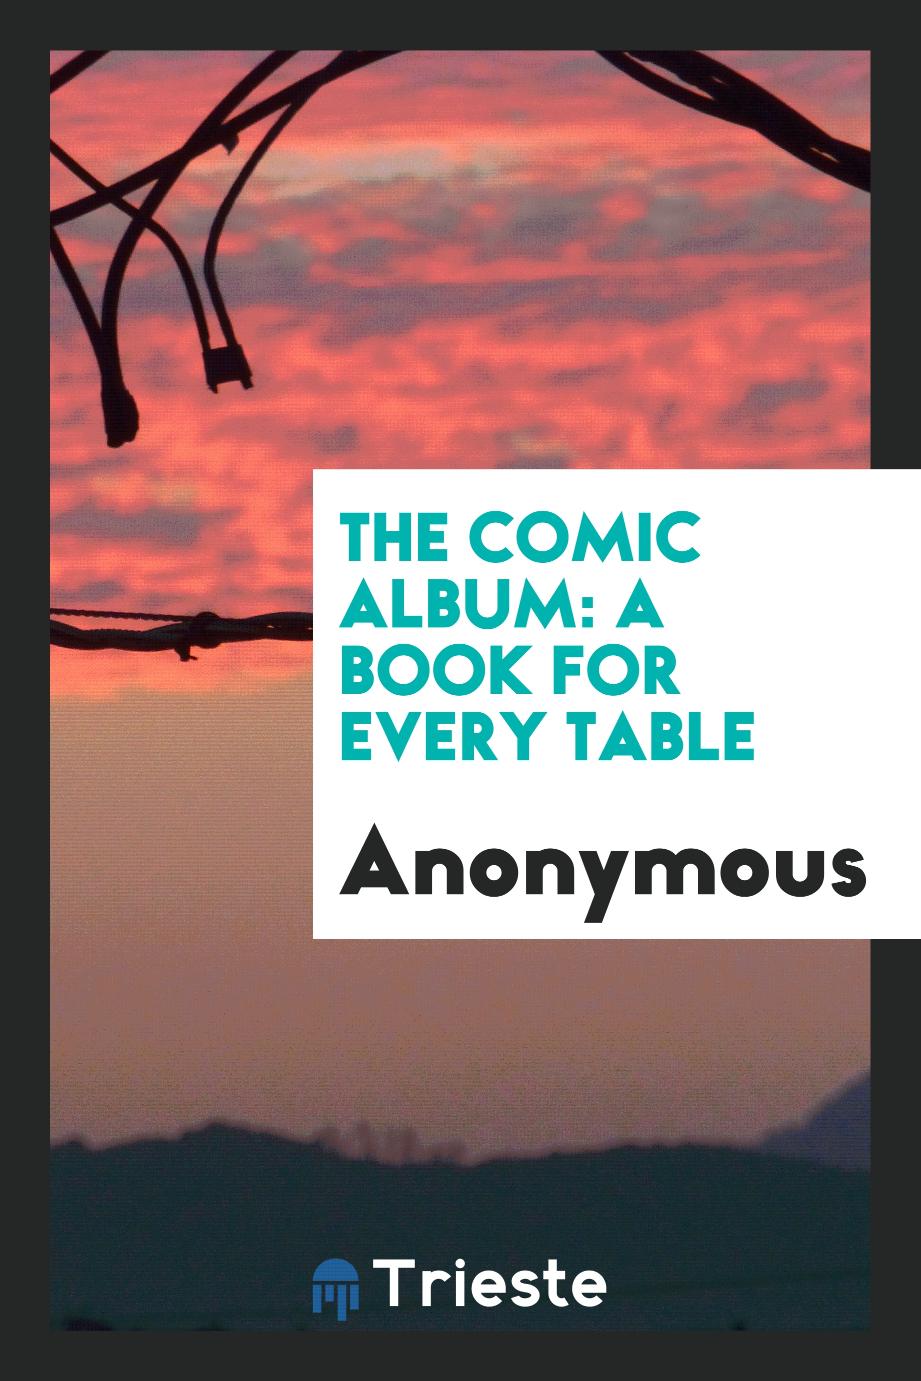 The Comic Album: A Book for Every Table